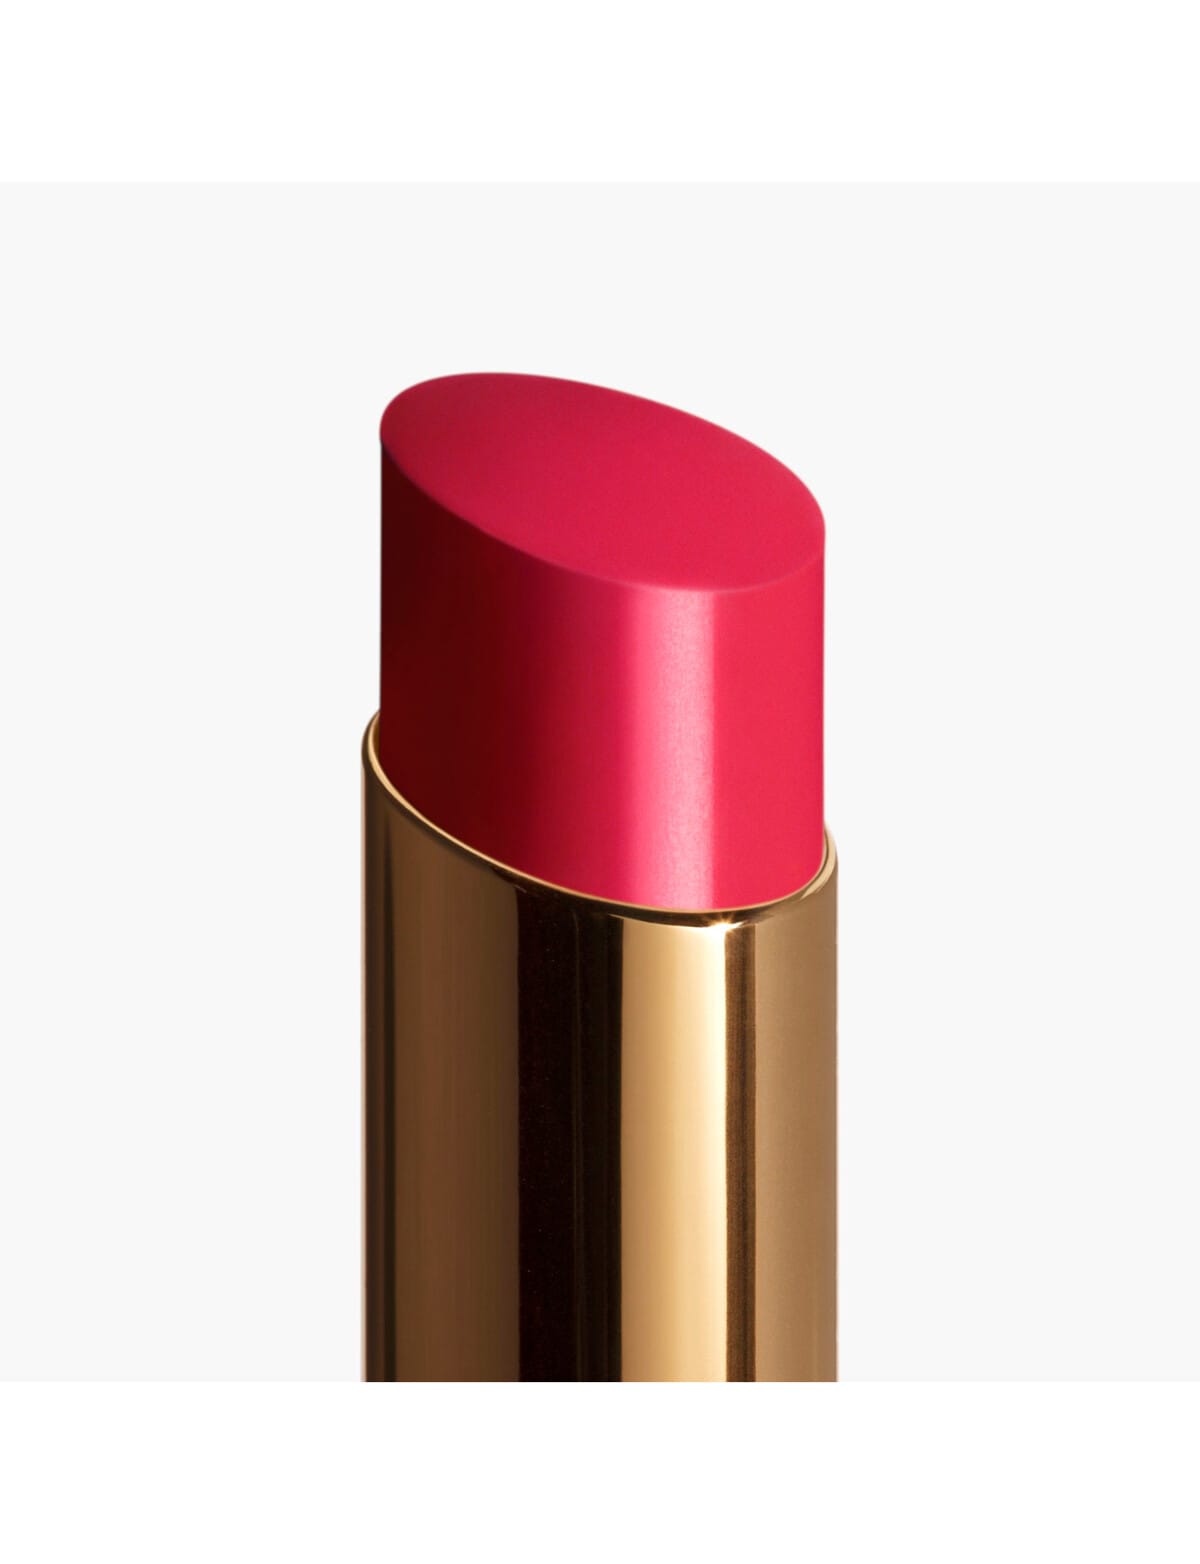 CHANEL ROUGE COCO FLASH Colour, Shine, Intensity In A Flash - LIPSTICKS